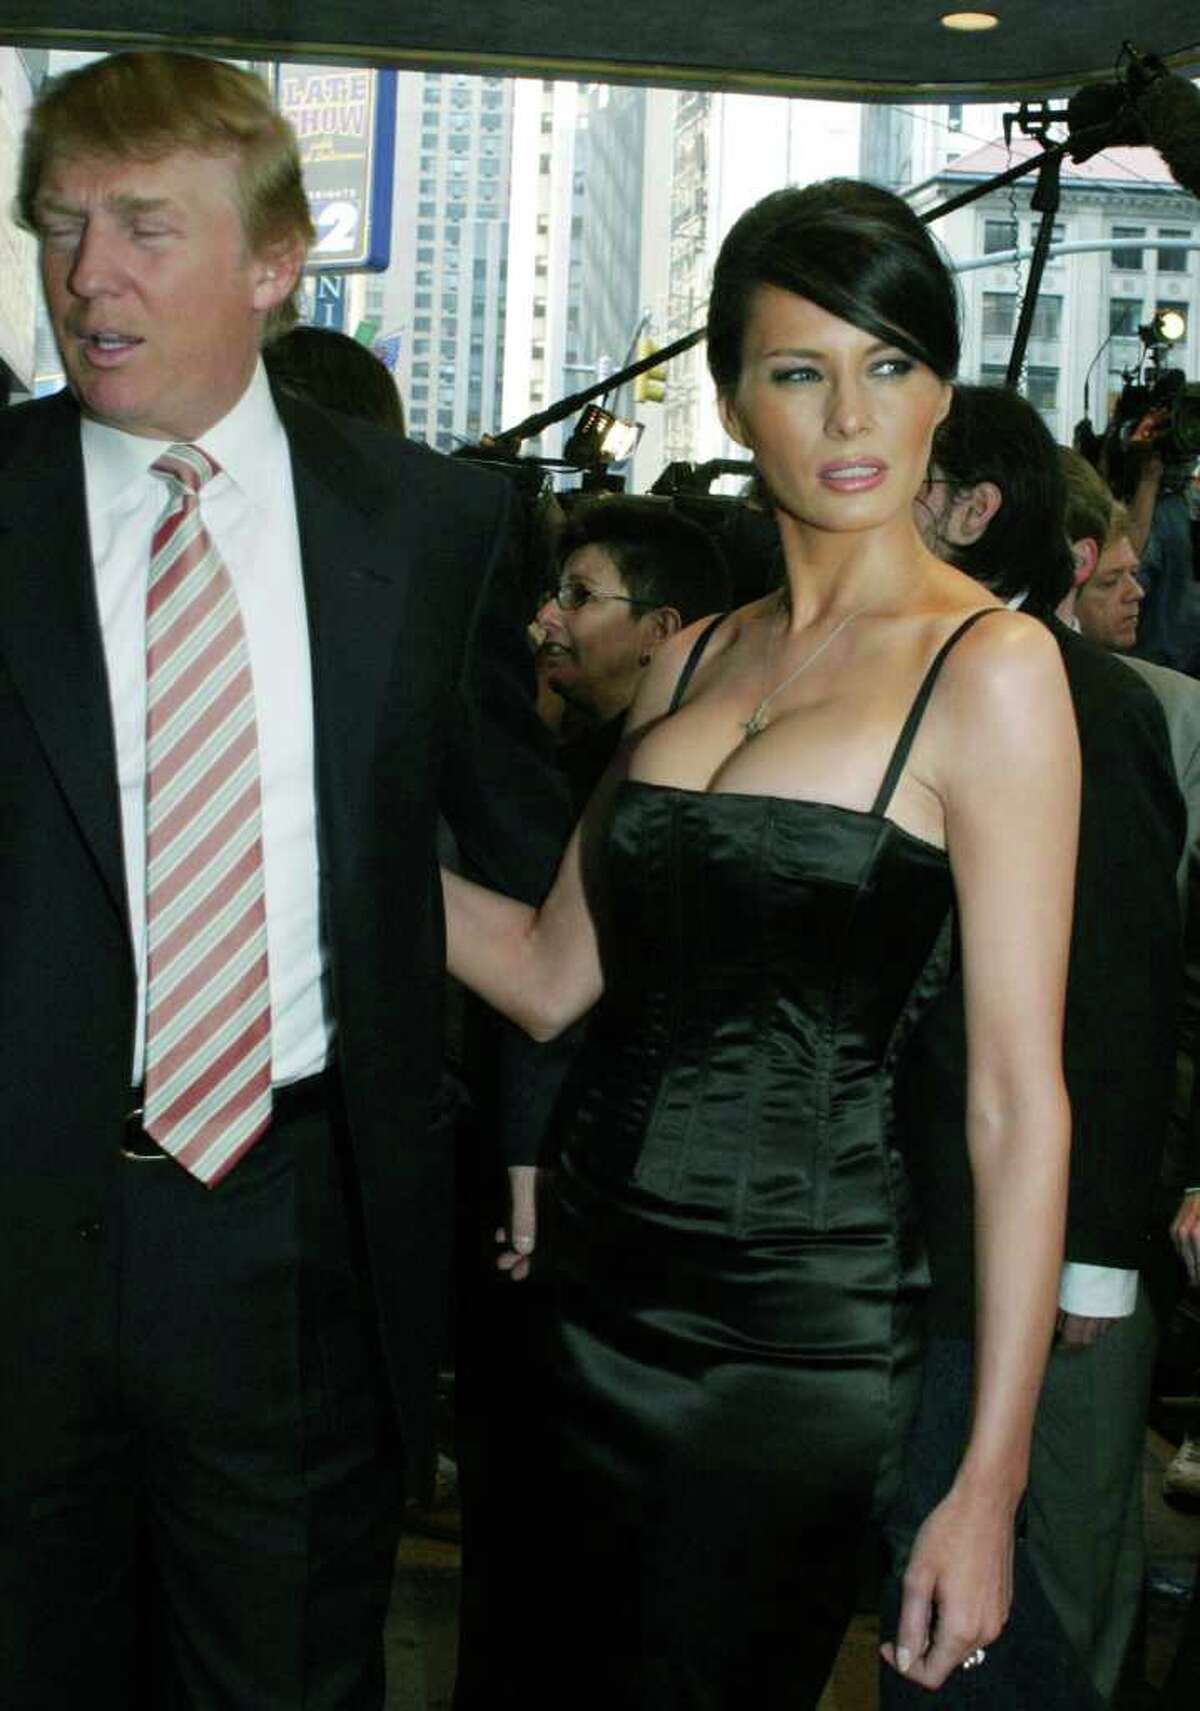 Billionaire developer Donald Trump and model Melania Knauss arrive at the opening night performance of "Bombay Dreams" at the Broadway Theatre Thursday, April 29, 2004 in New York. The pair were engaged on Monday.